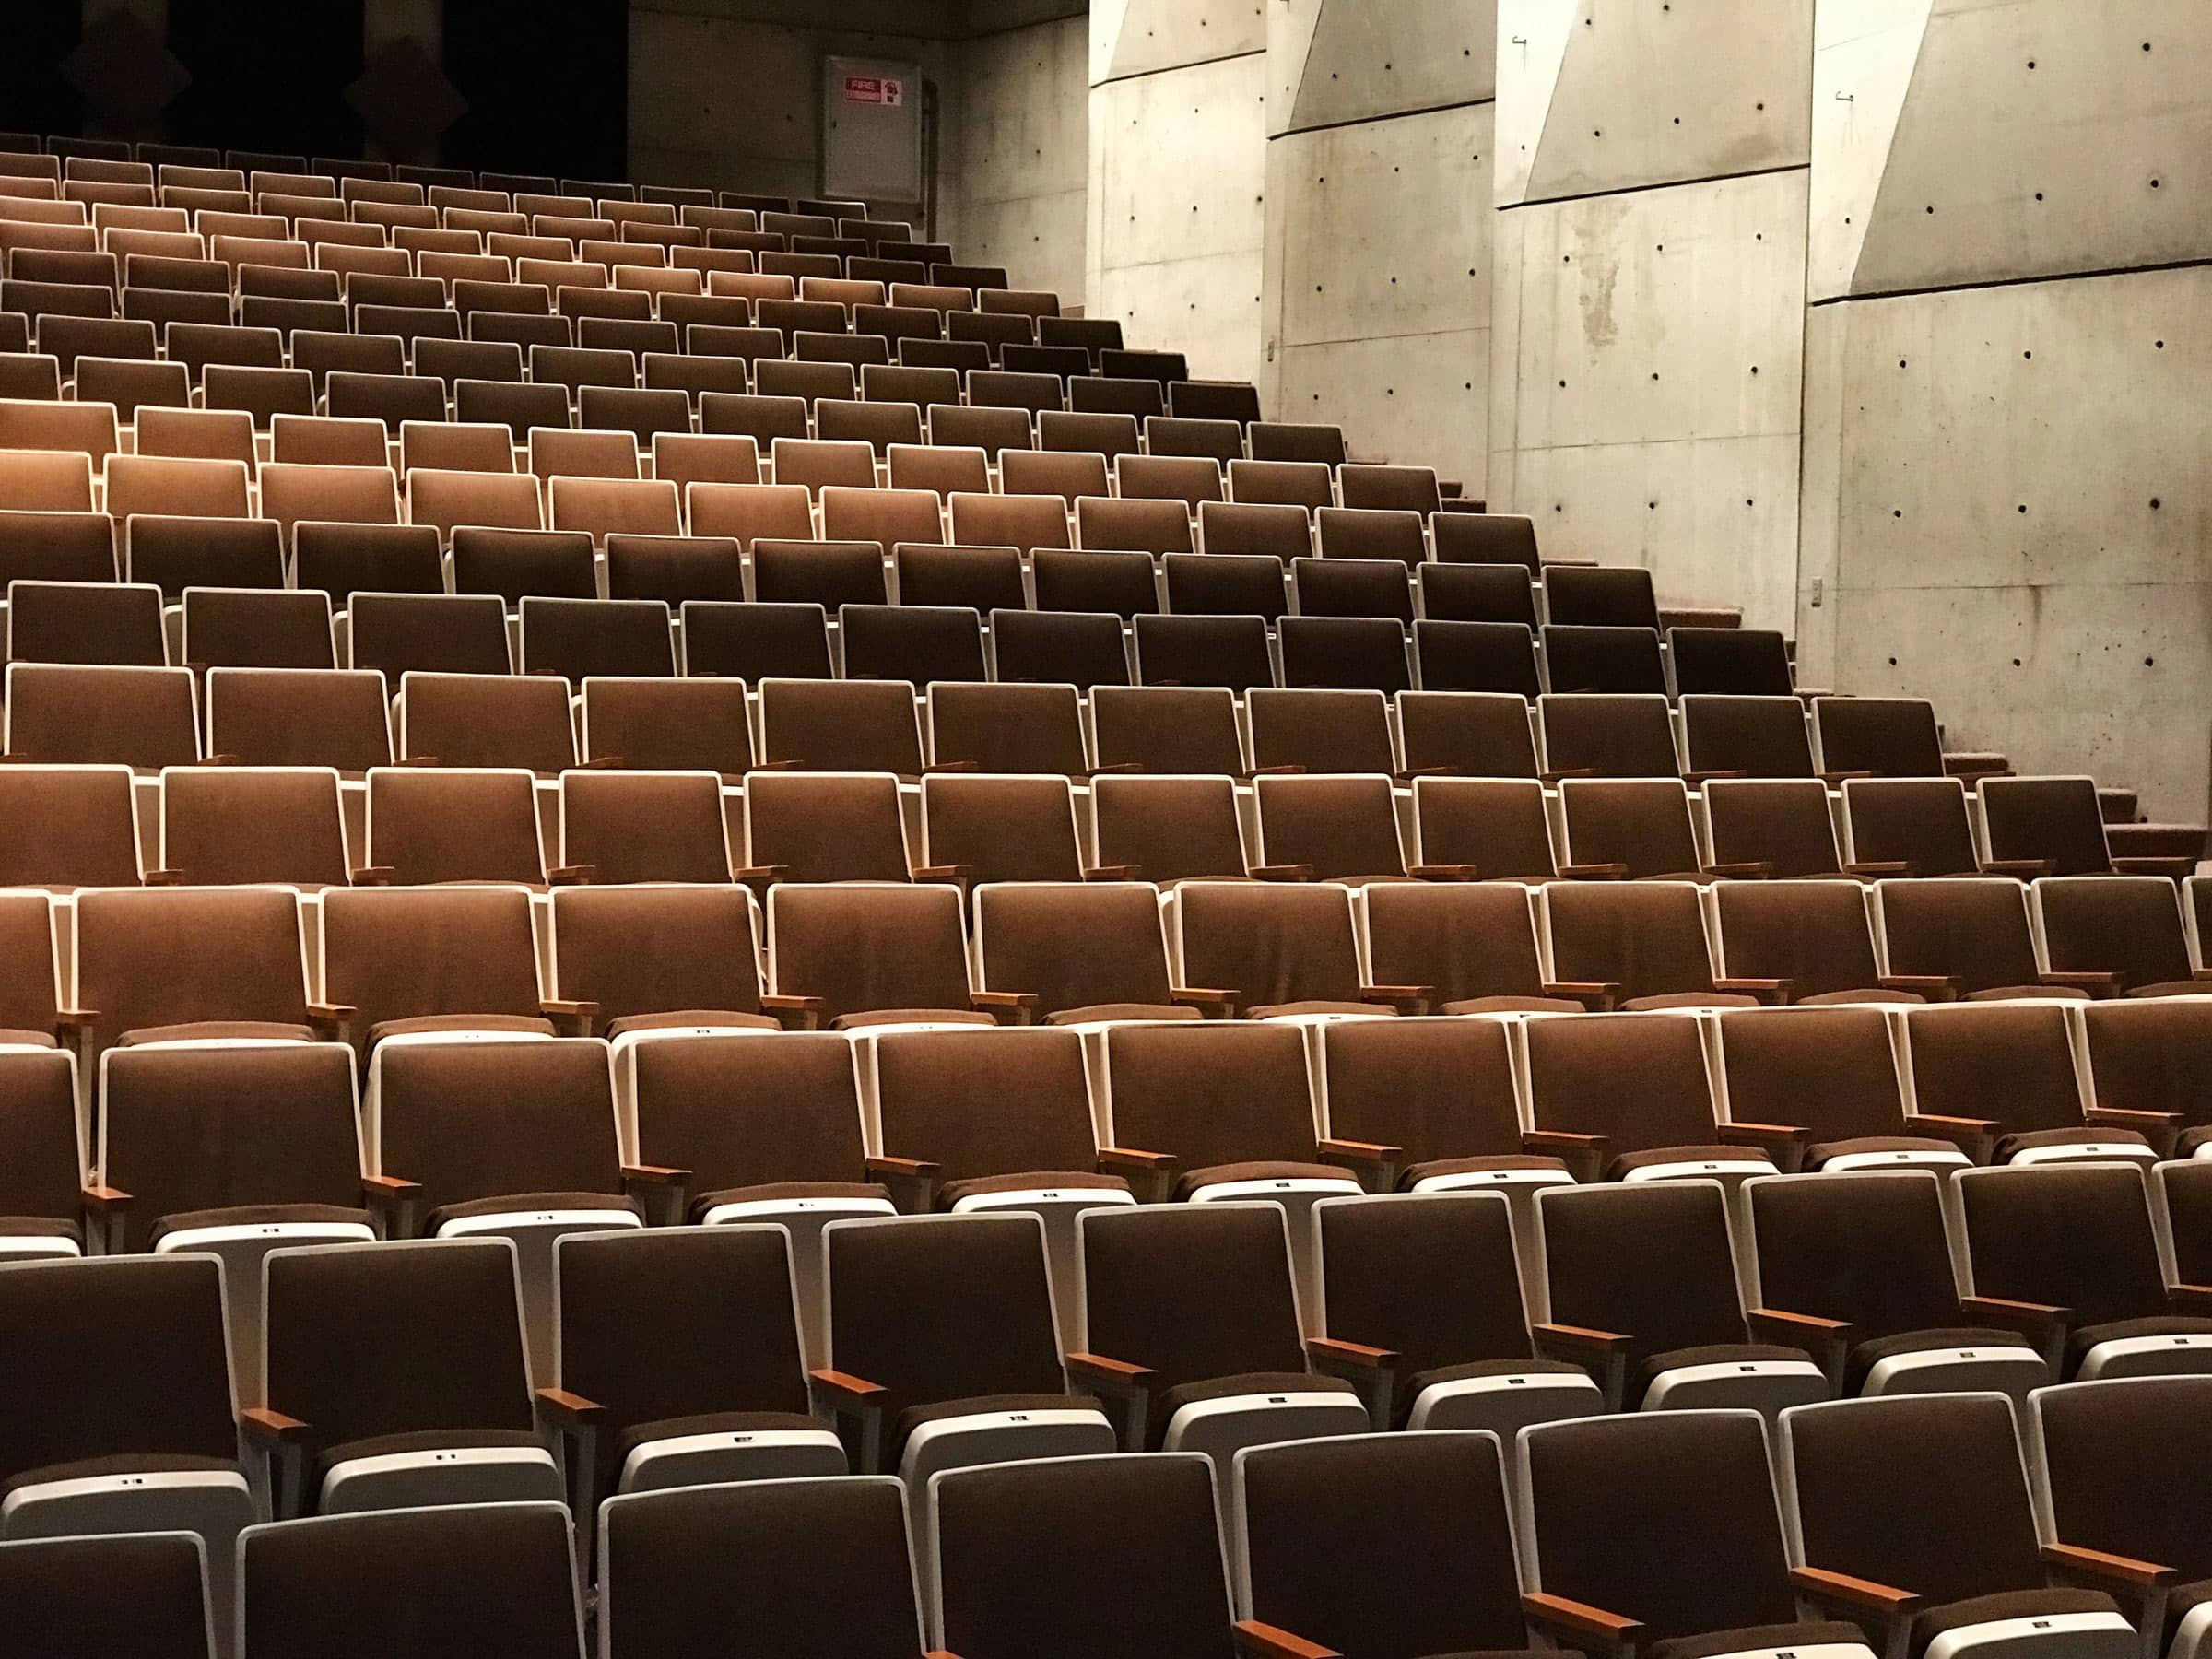 Image of theatre style seating all empty